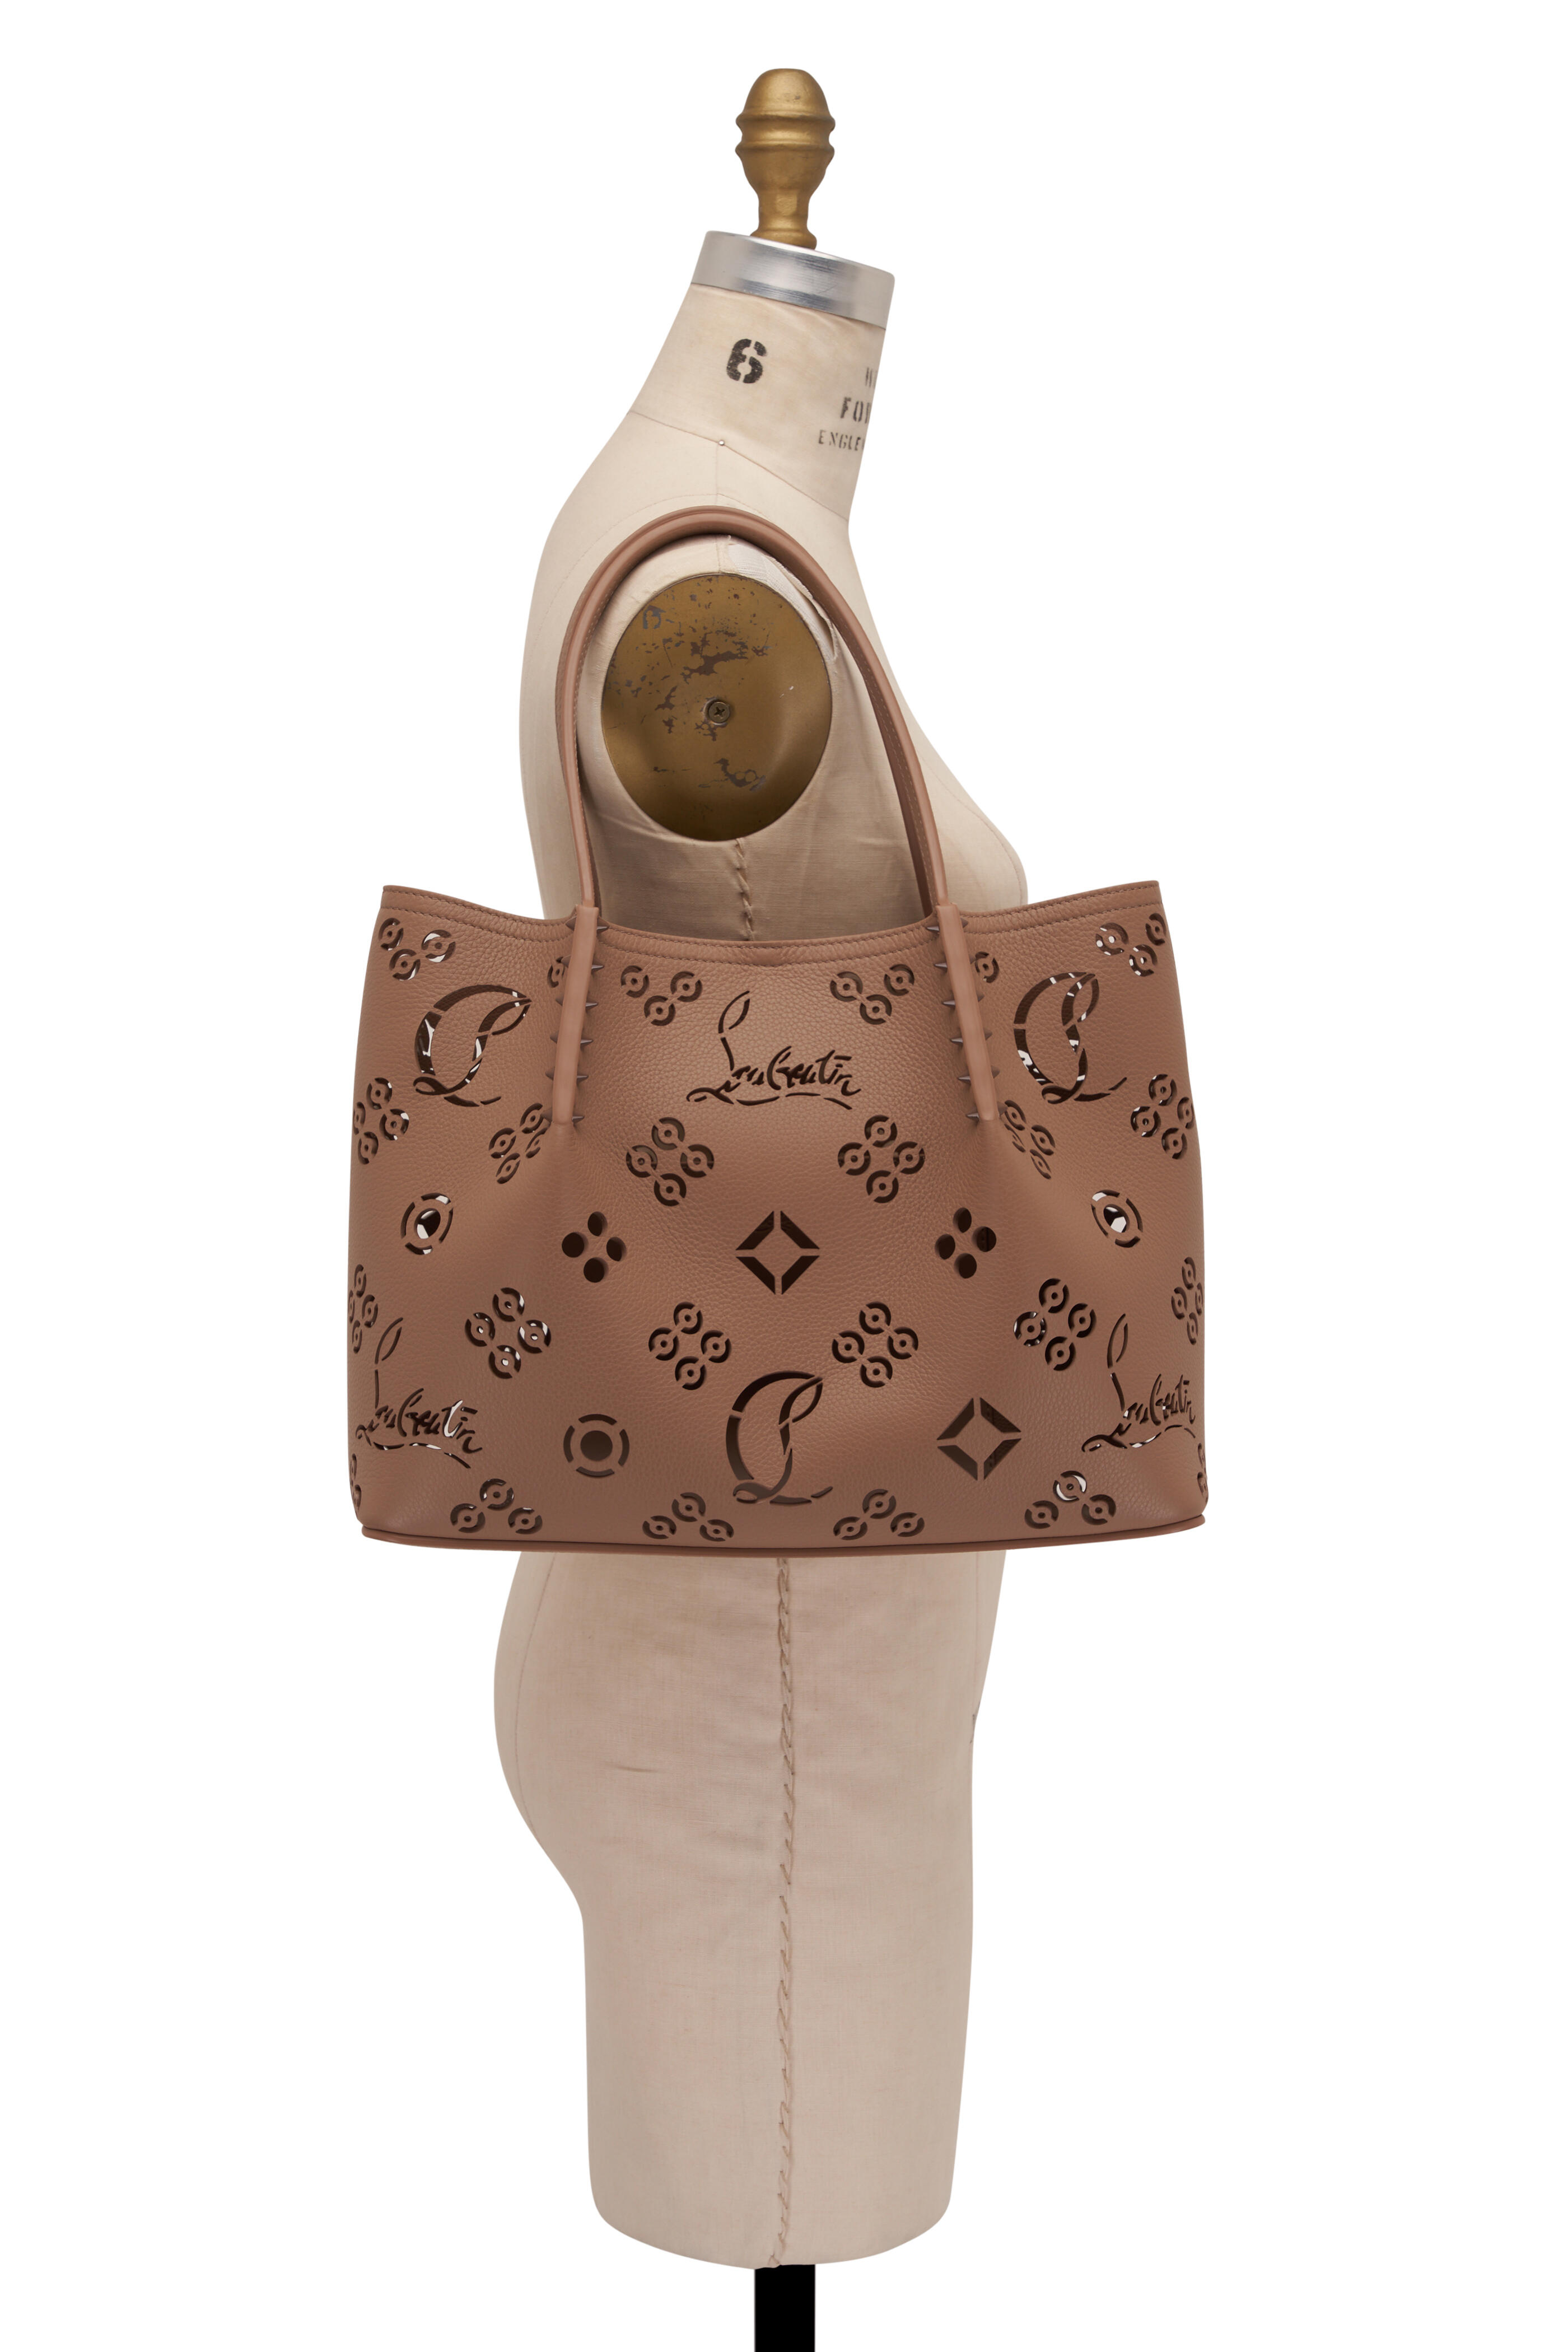 Guess Vikky Tote Purse - Women's Accessories in Brown